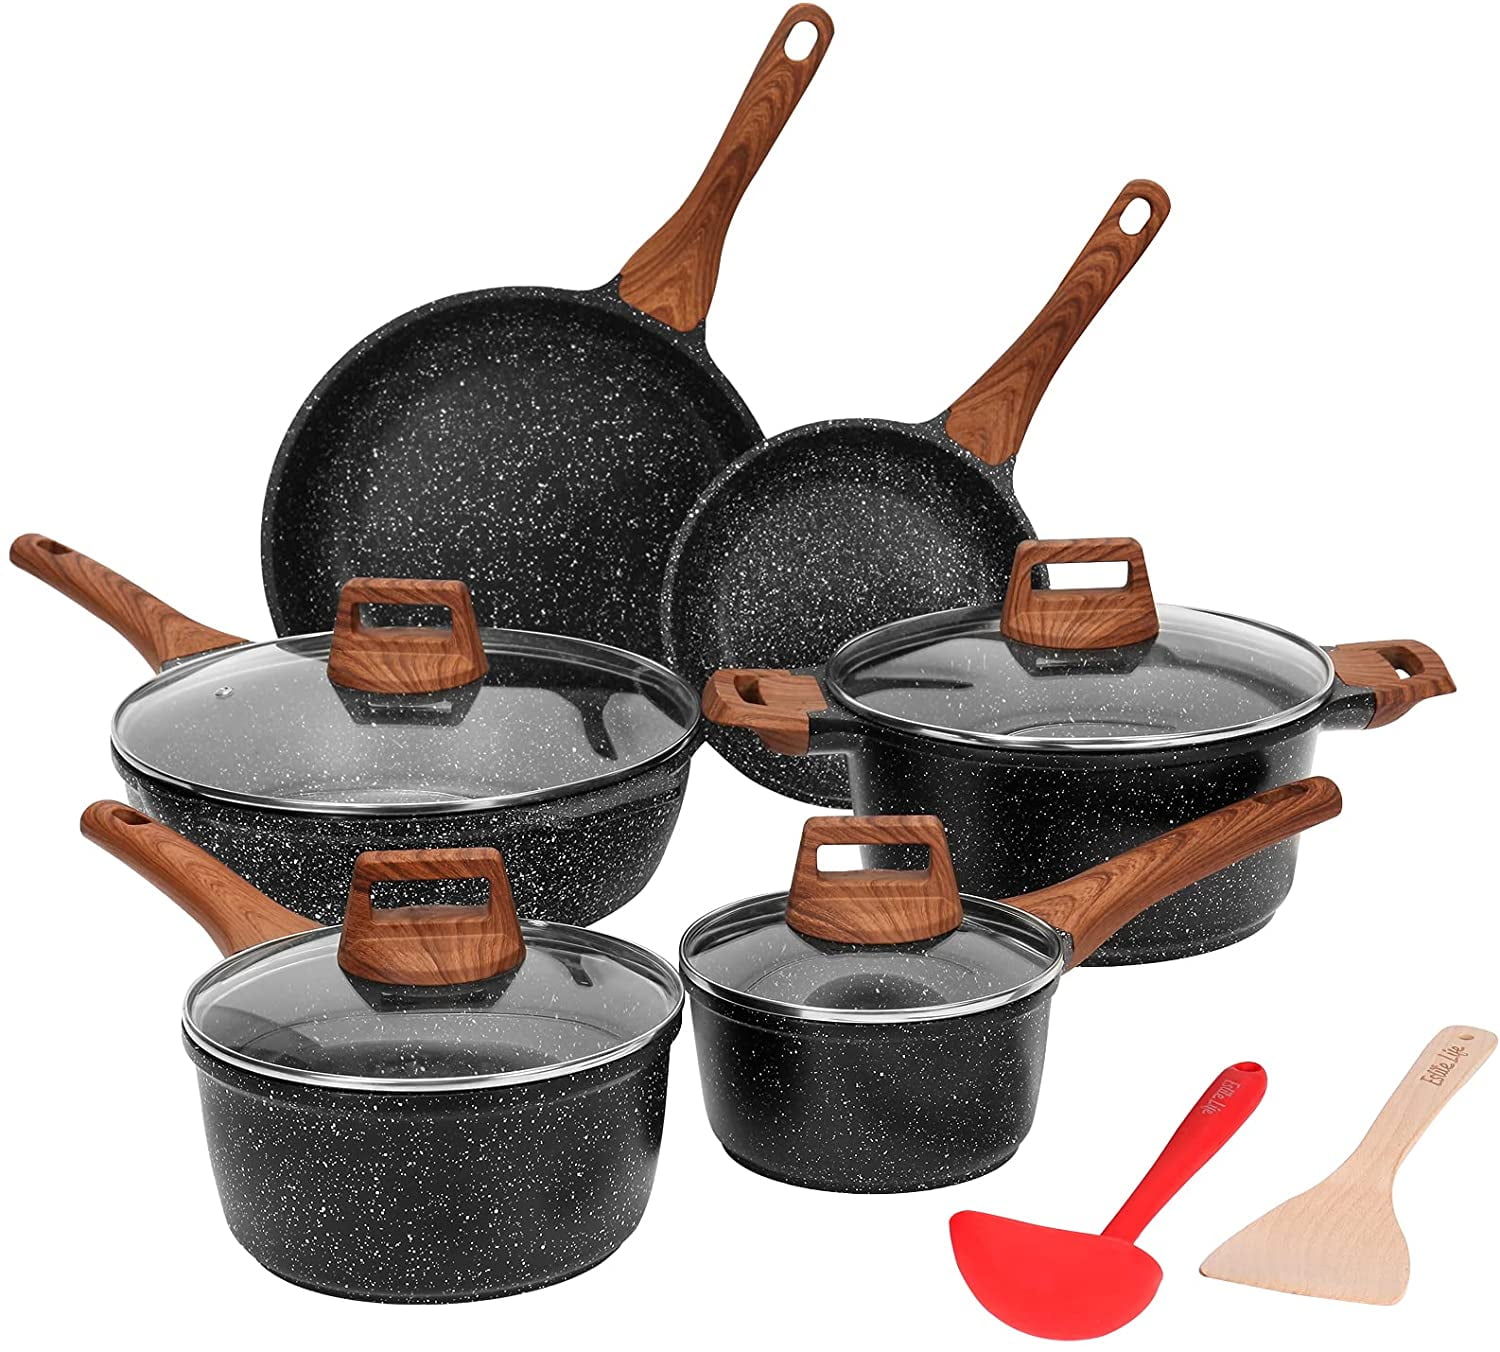 ESLITE LIFE Nonstick Cookware Sets, 12 Pcs Granite Coating Pots and Pans  Set Kitchen Cooking Set, Compatible with All Stovetops (Gas, Electric 